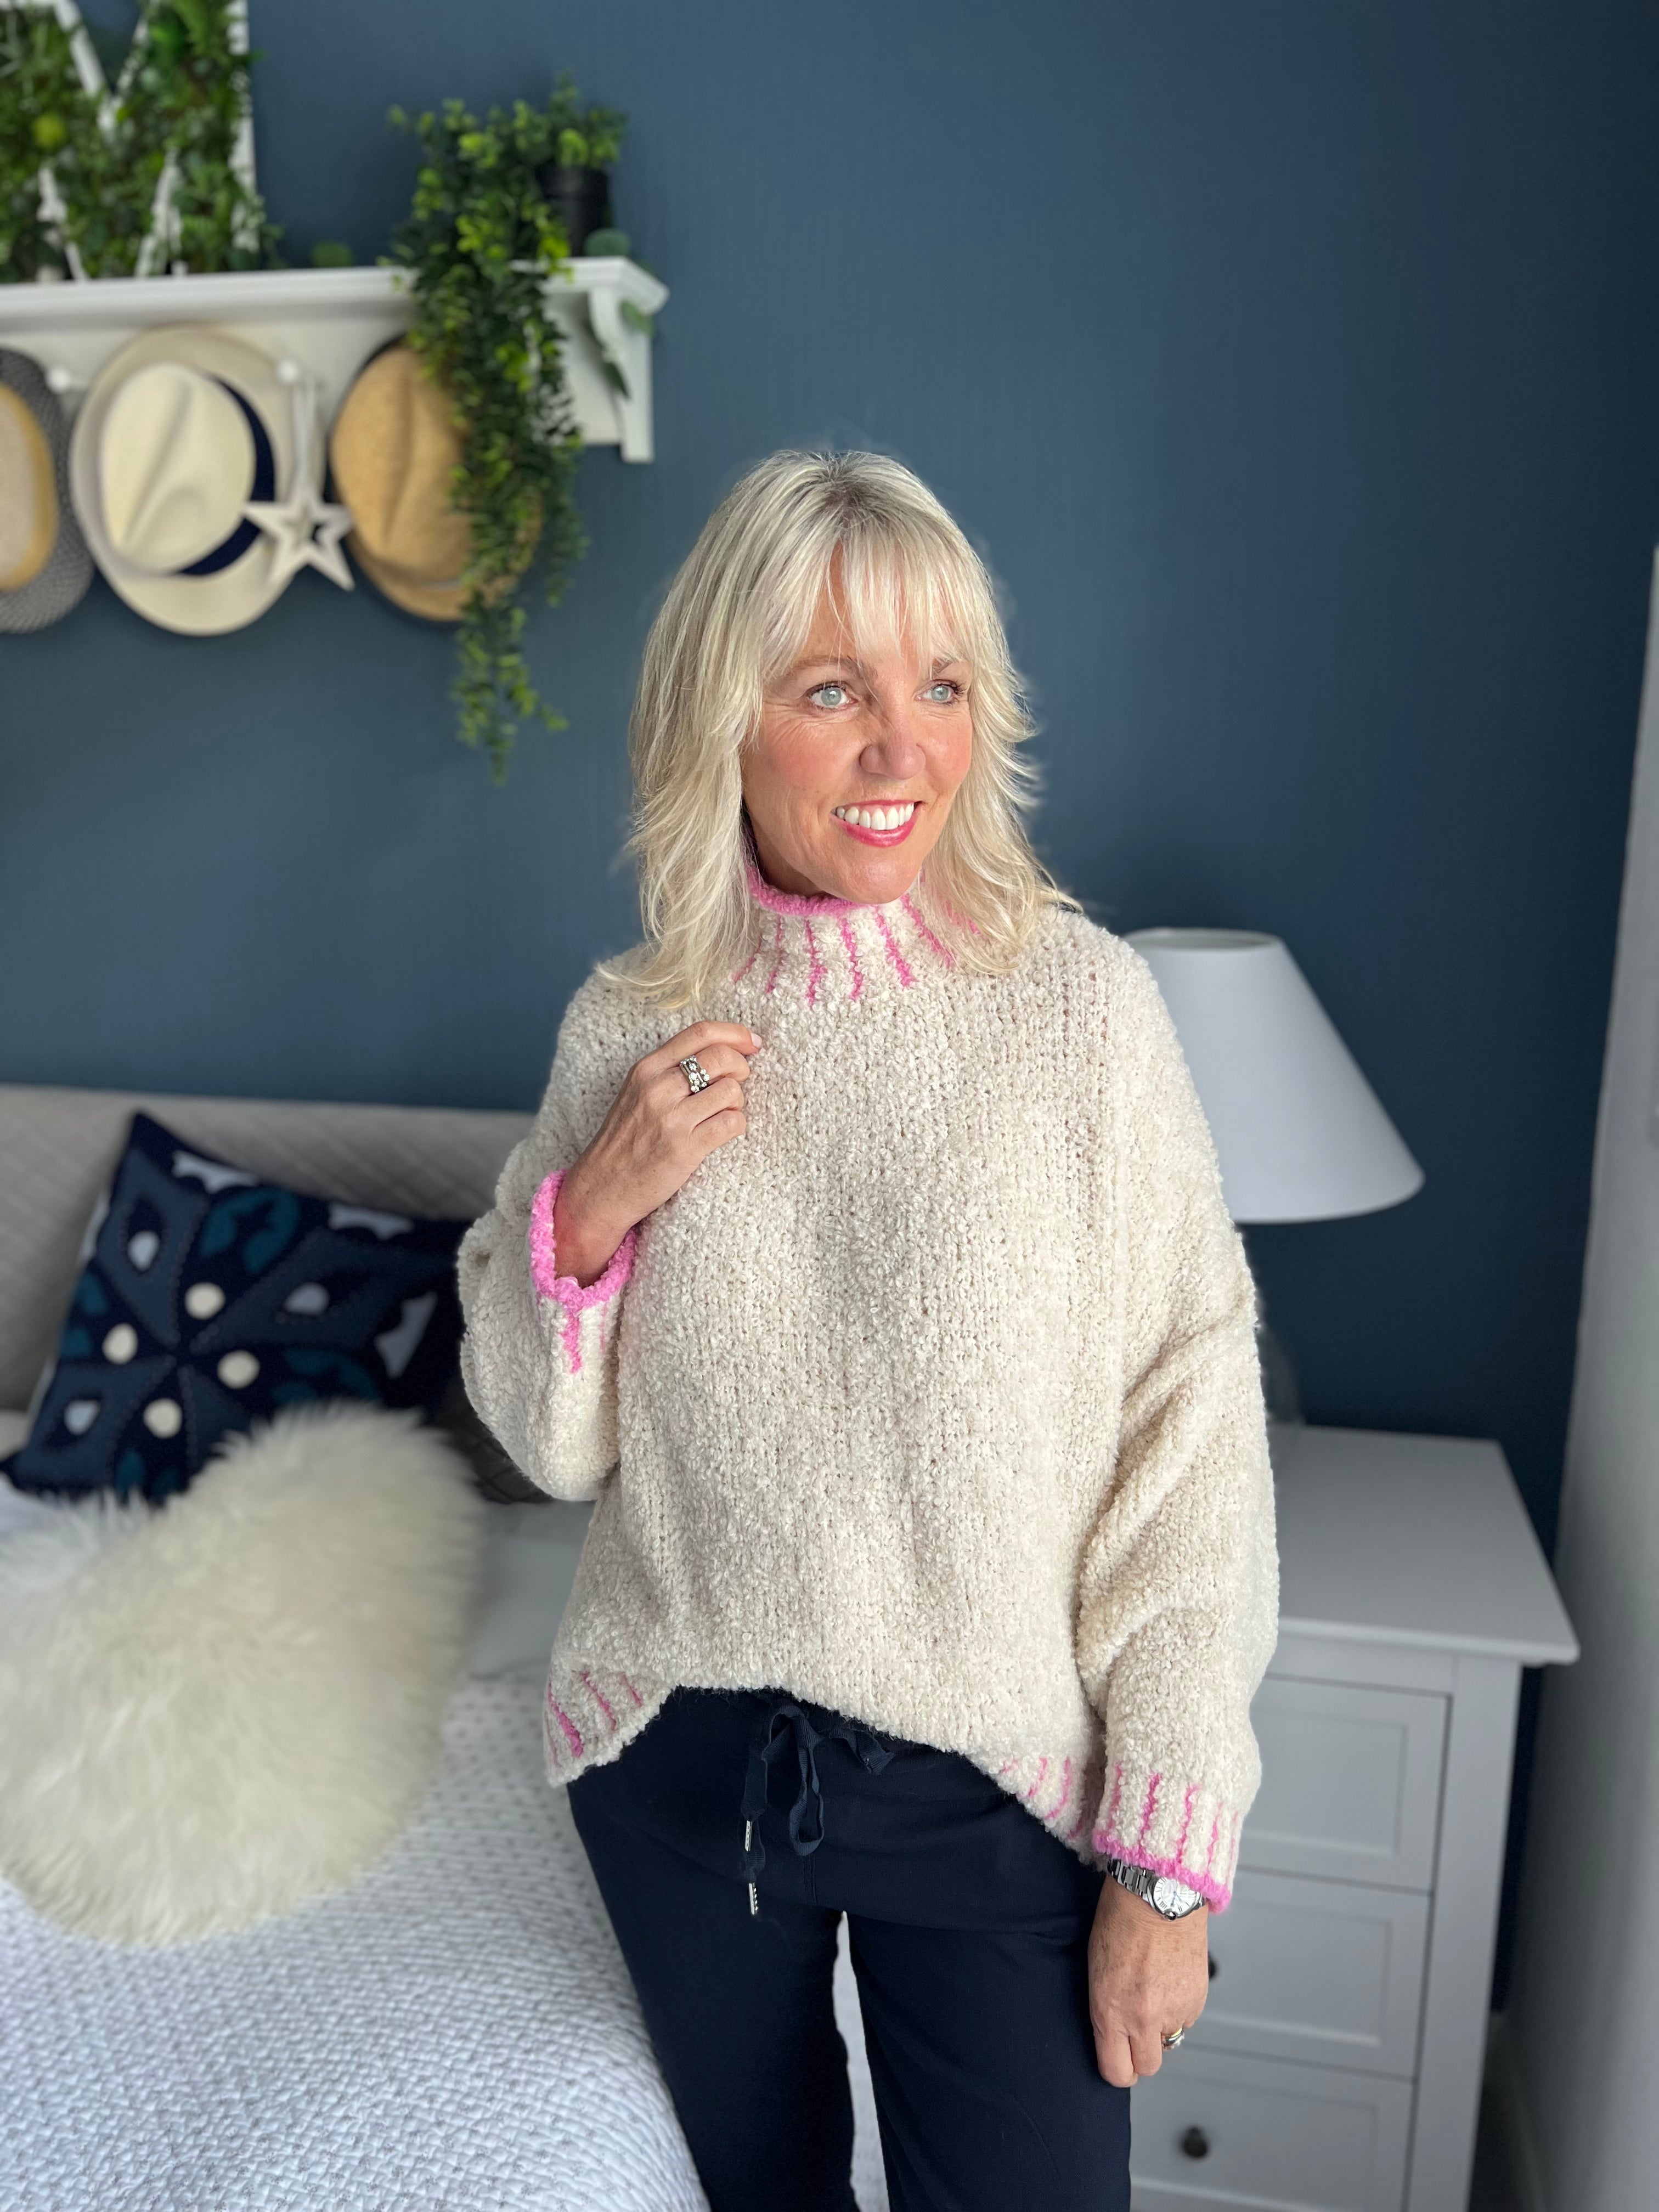 Funnel Neck Boucle Jumper in Vanilla & Pink